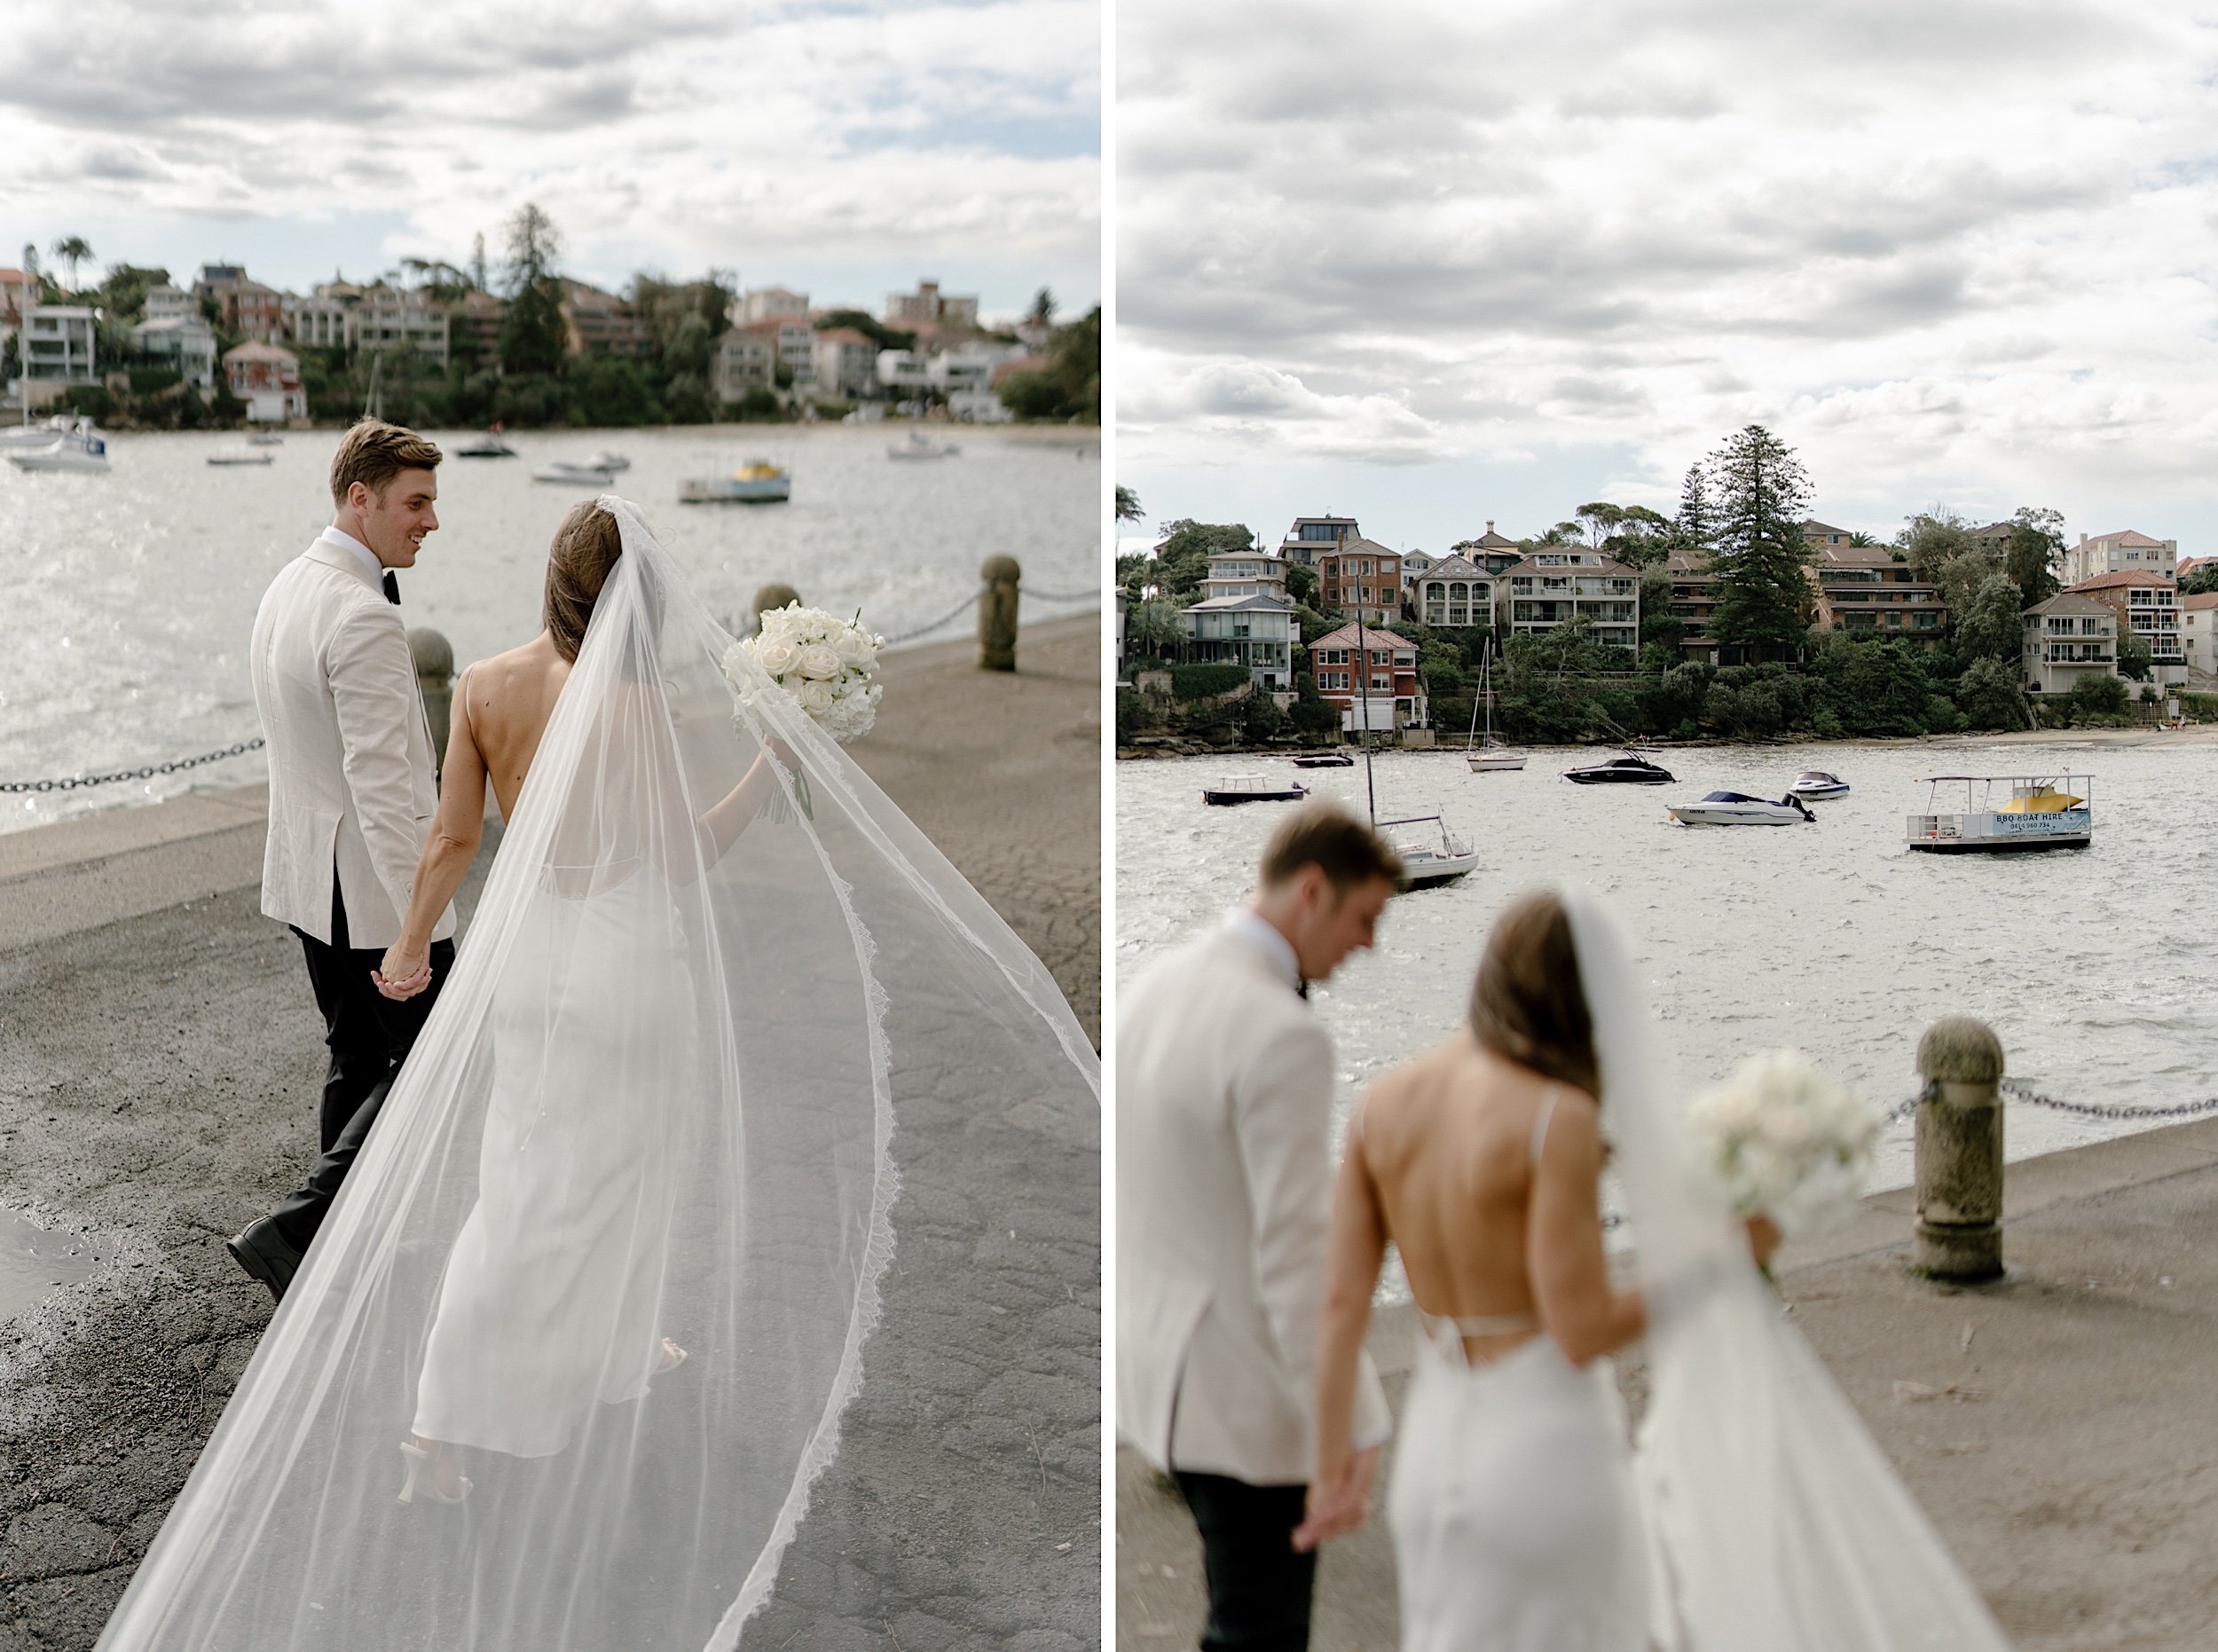 057_manly-yacht-club-wedding-photography_0083_manly-yacht-club-wedding-photography_0084.jpg